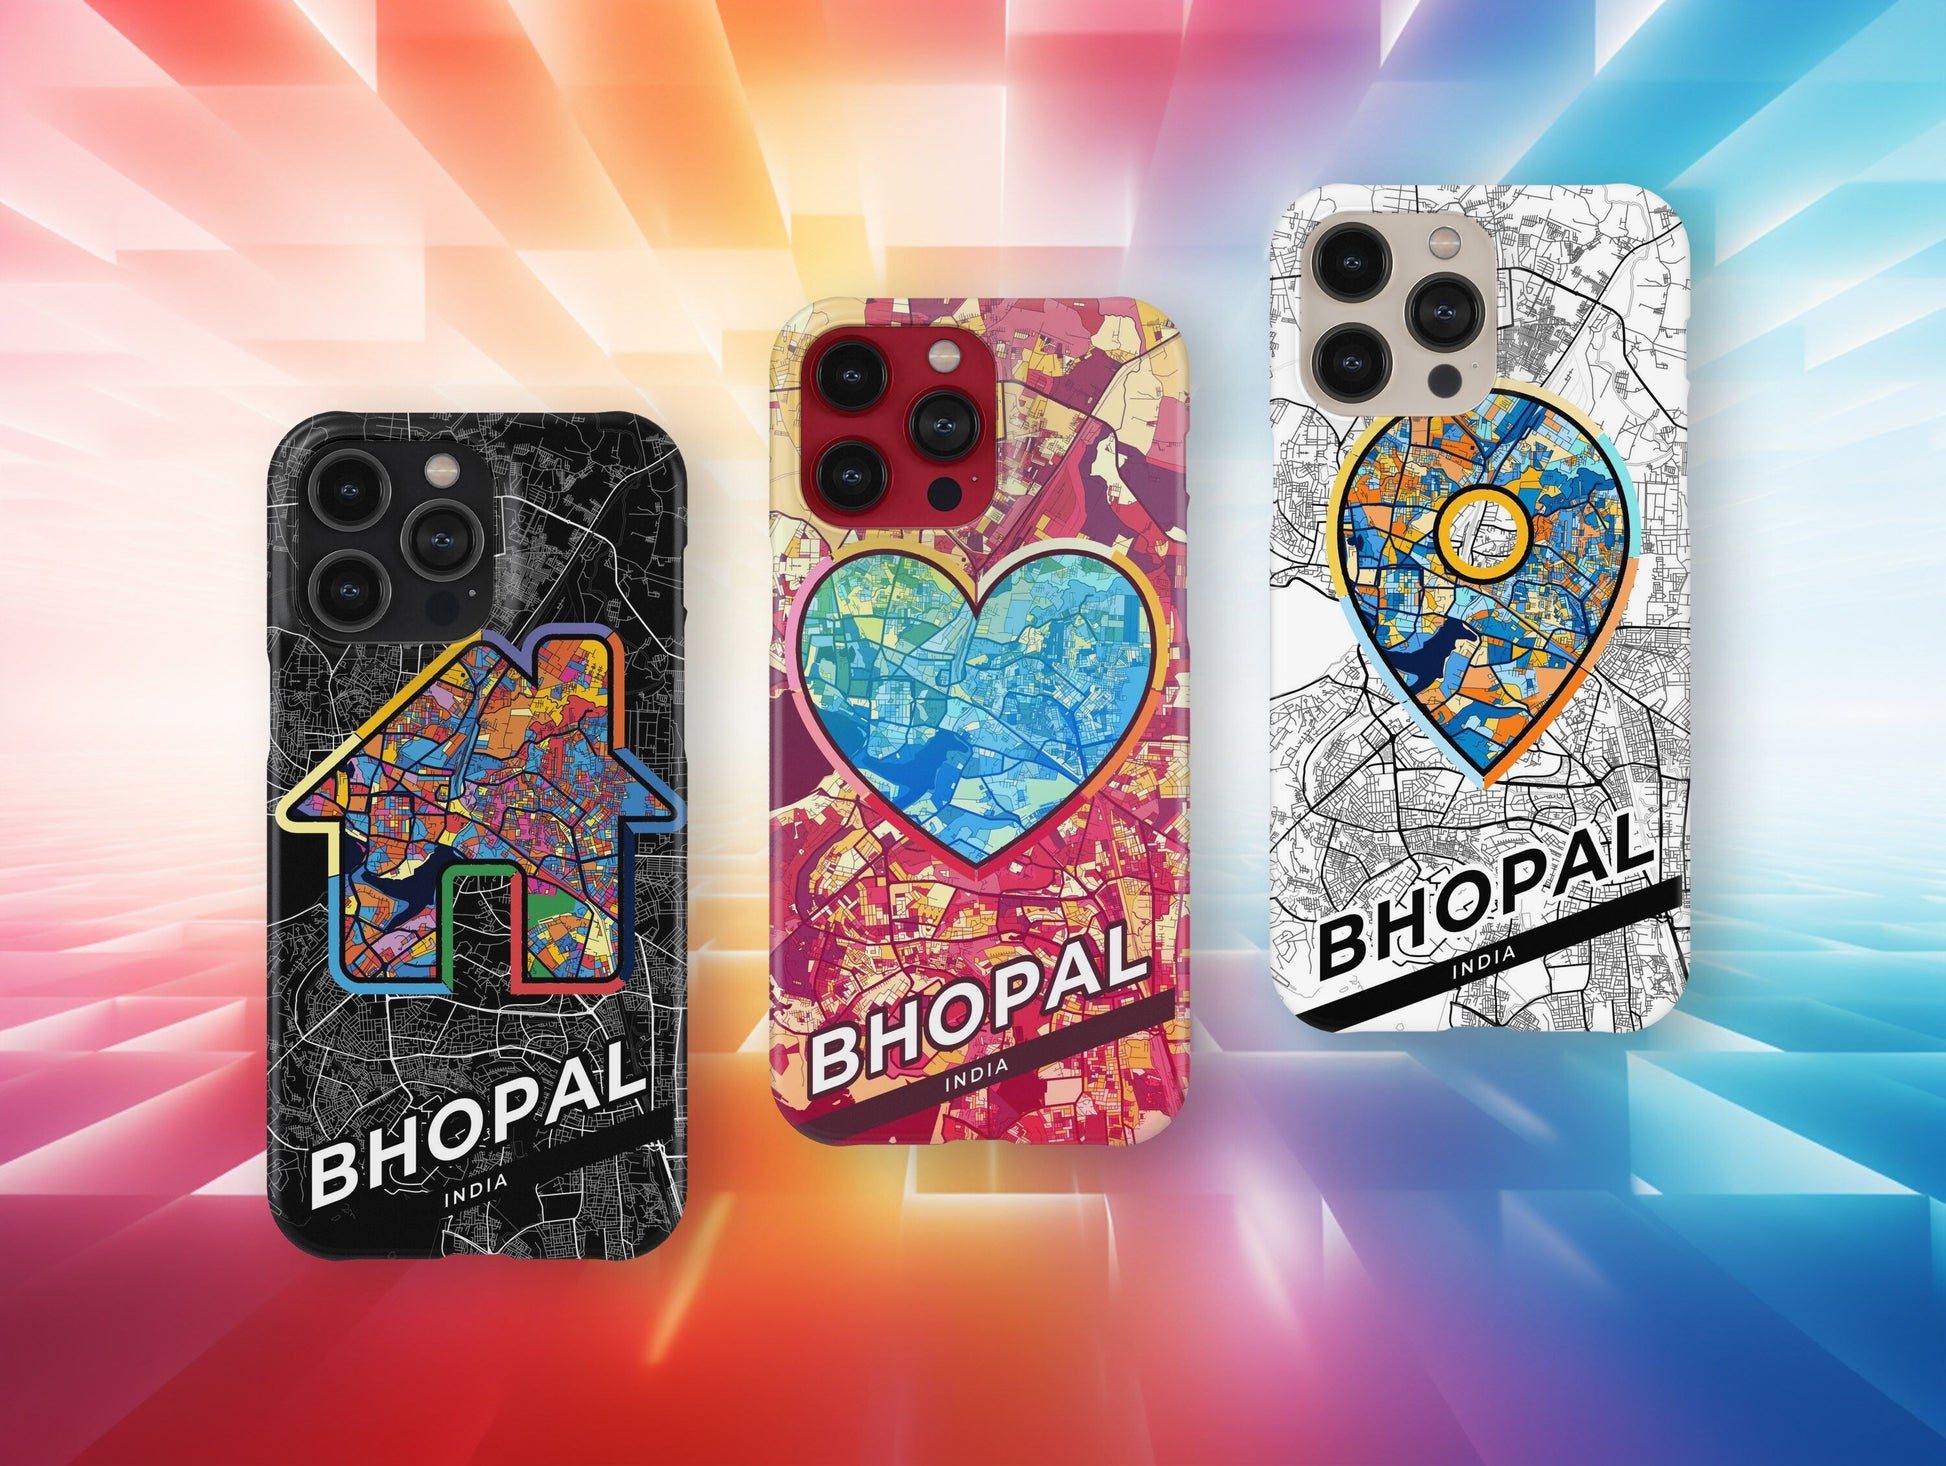 Bhopal India slim phone case with colorful icon. Birthday, wedding or housewarming gift. Couple match cases.